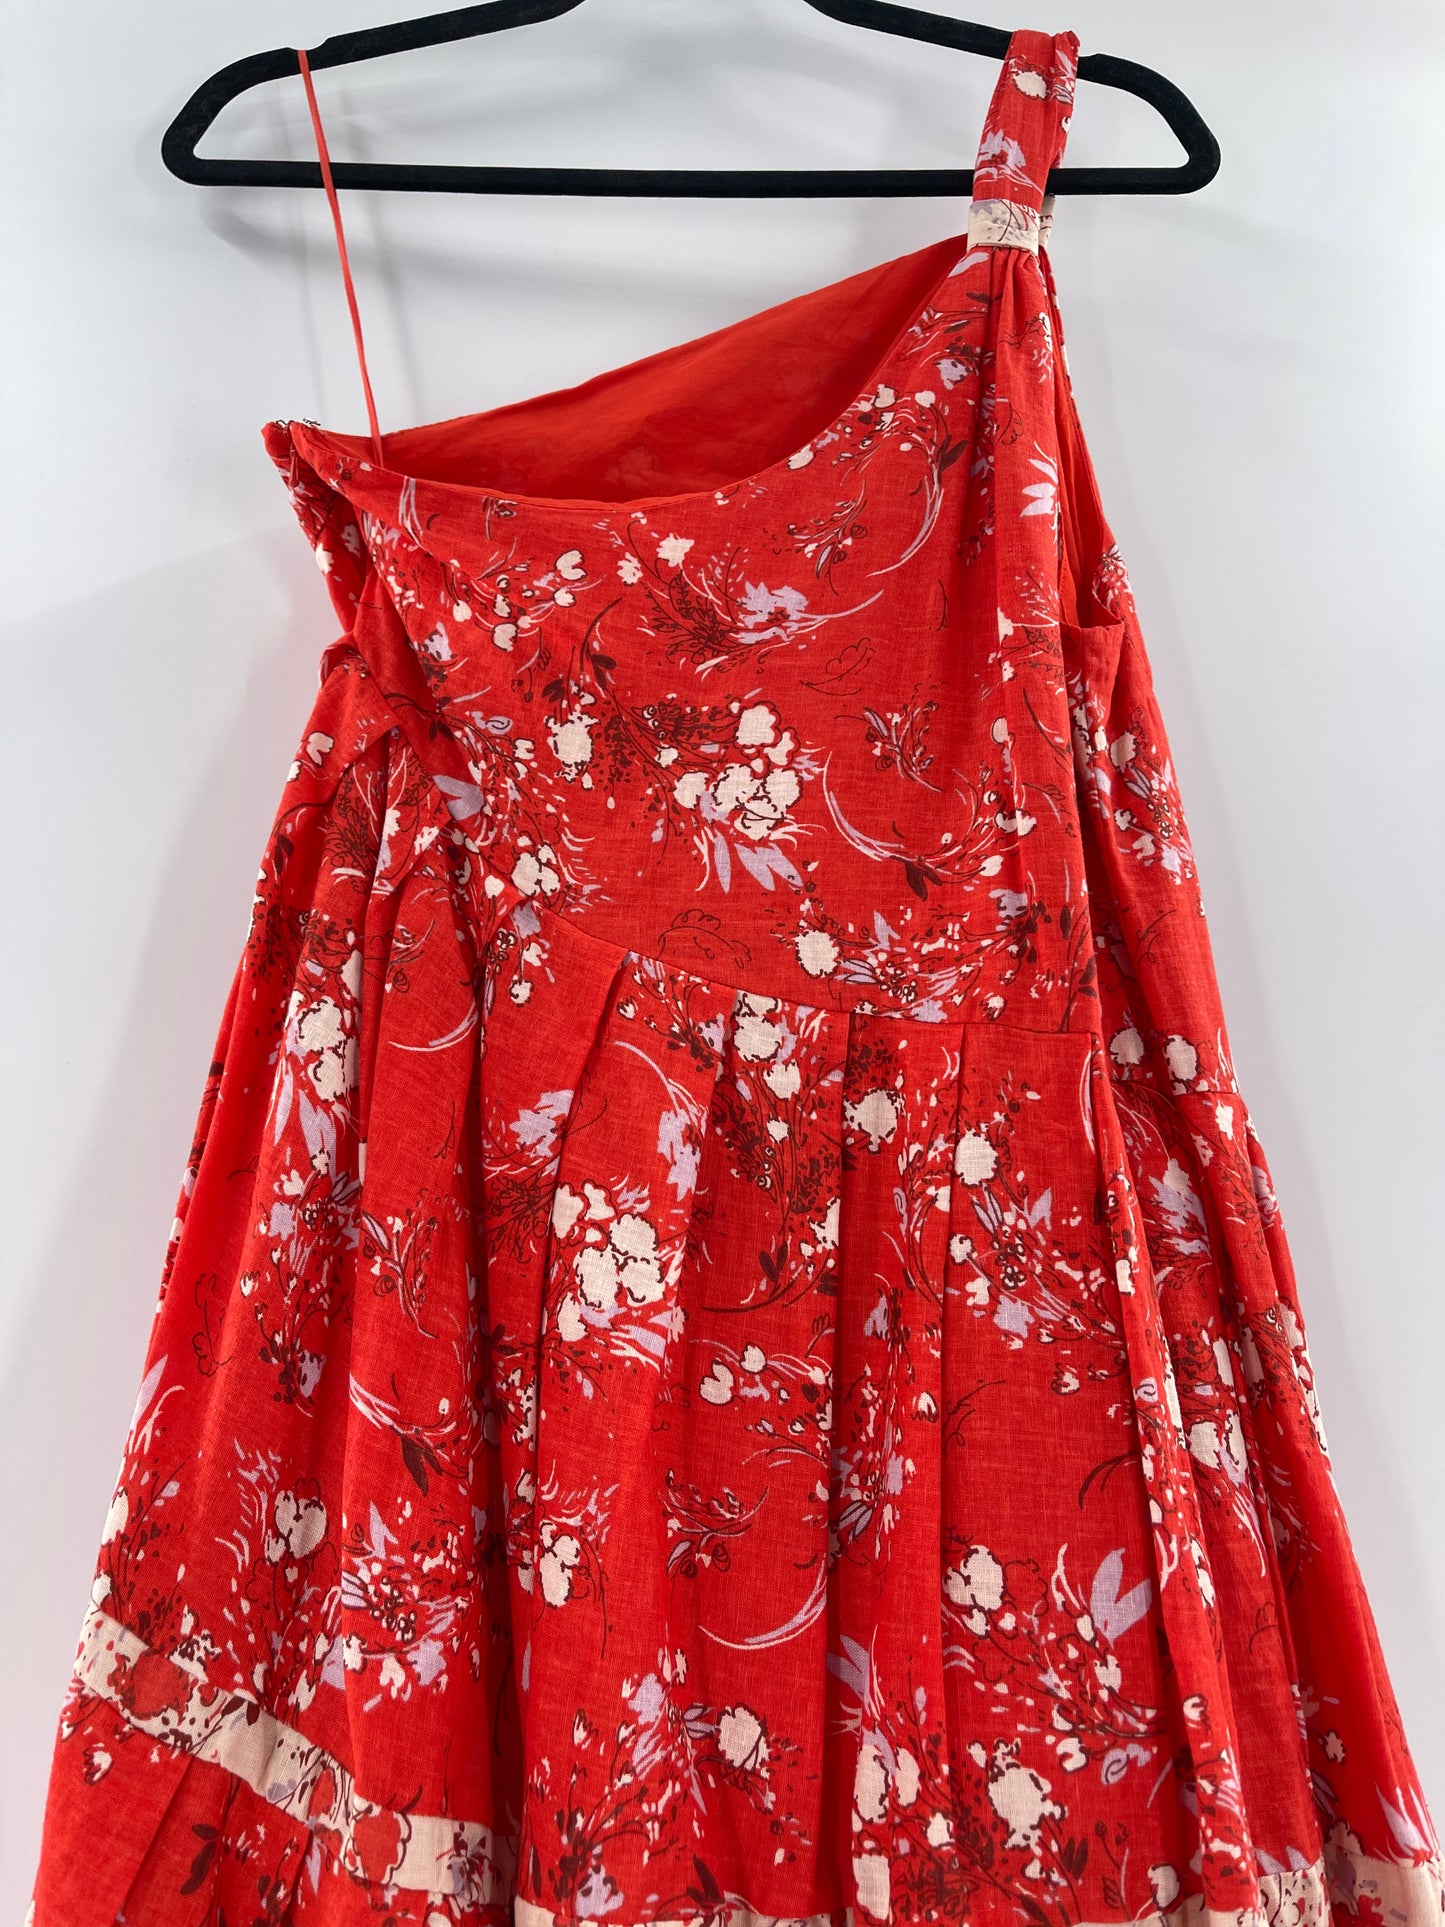 Free People One Shoulder Red Floral Mini Dress (Size XS)